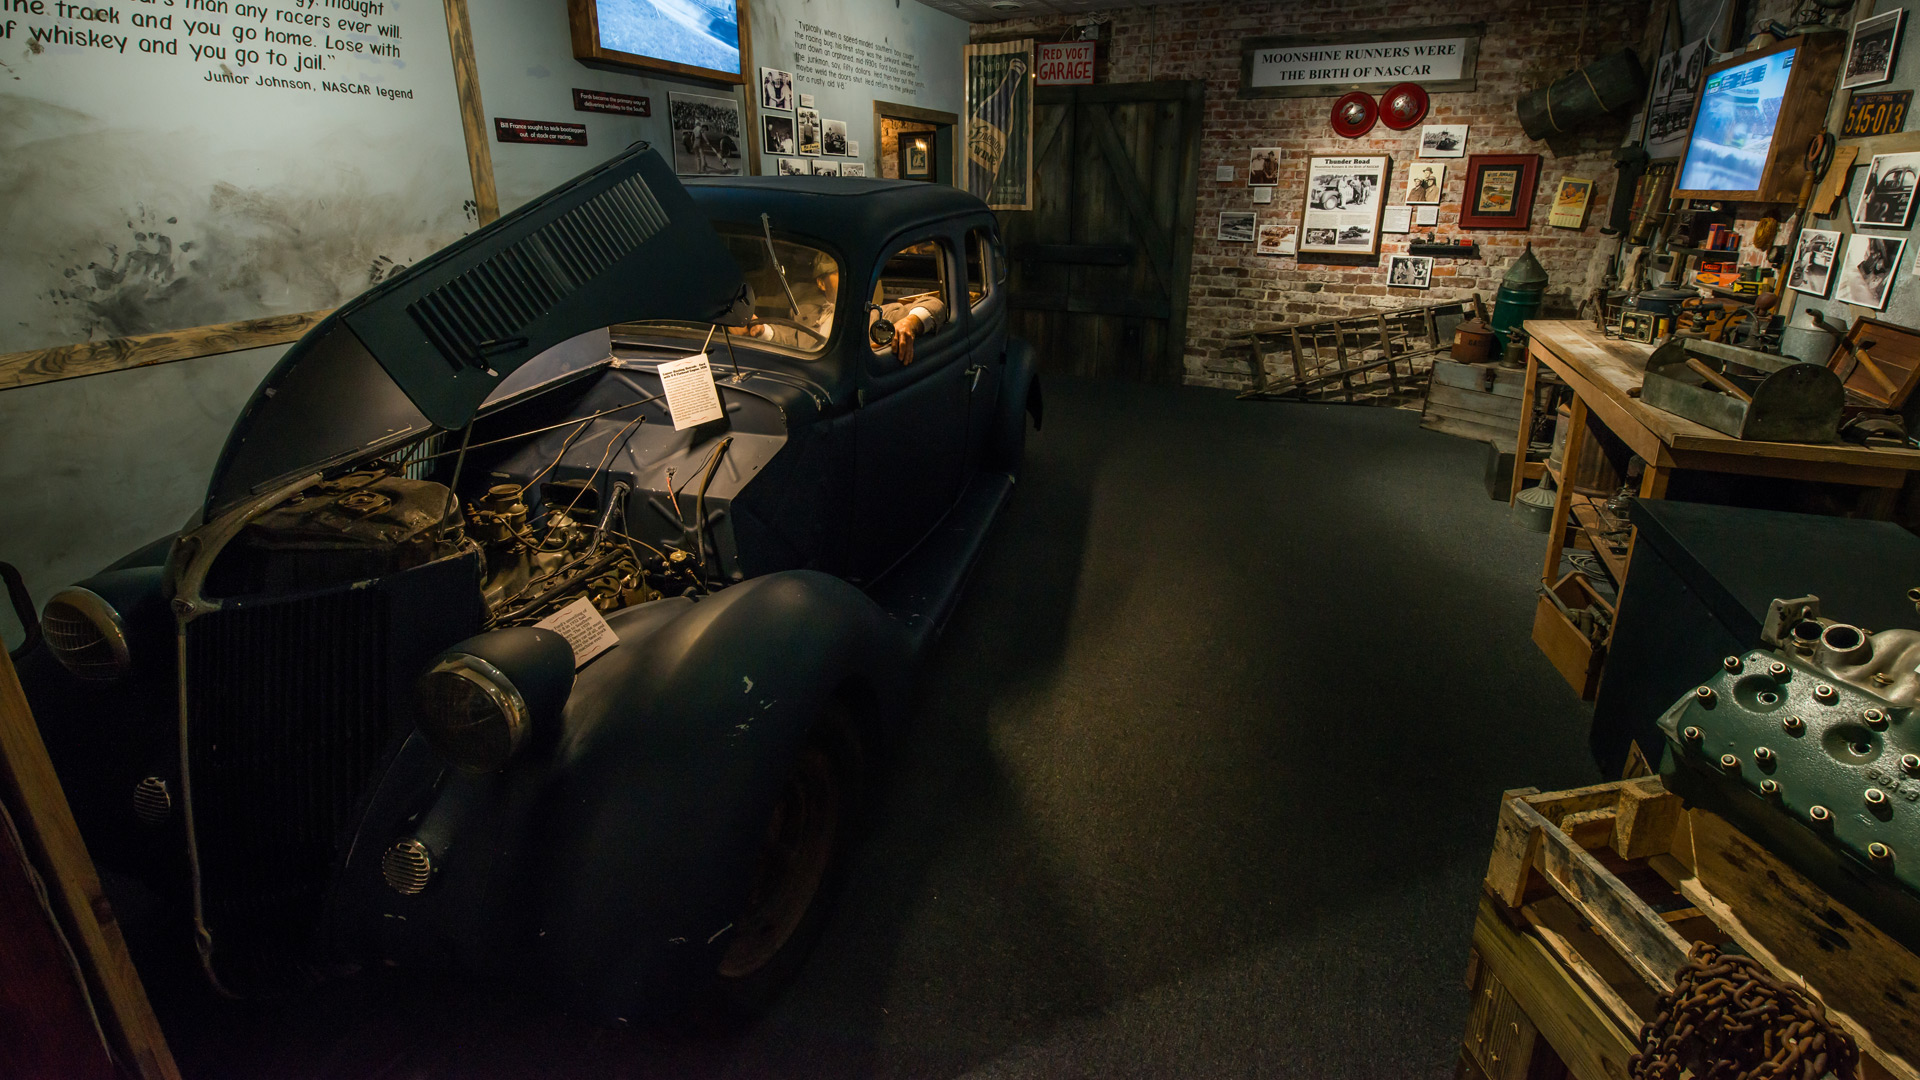 exhibit at the american prohibition museum